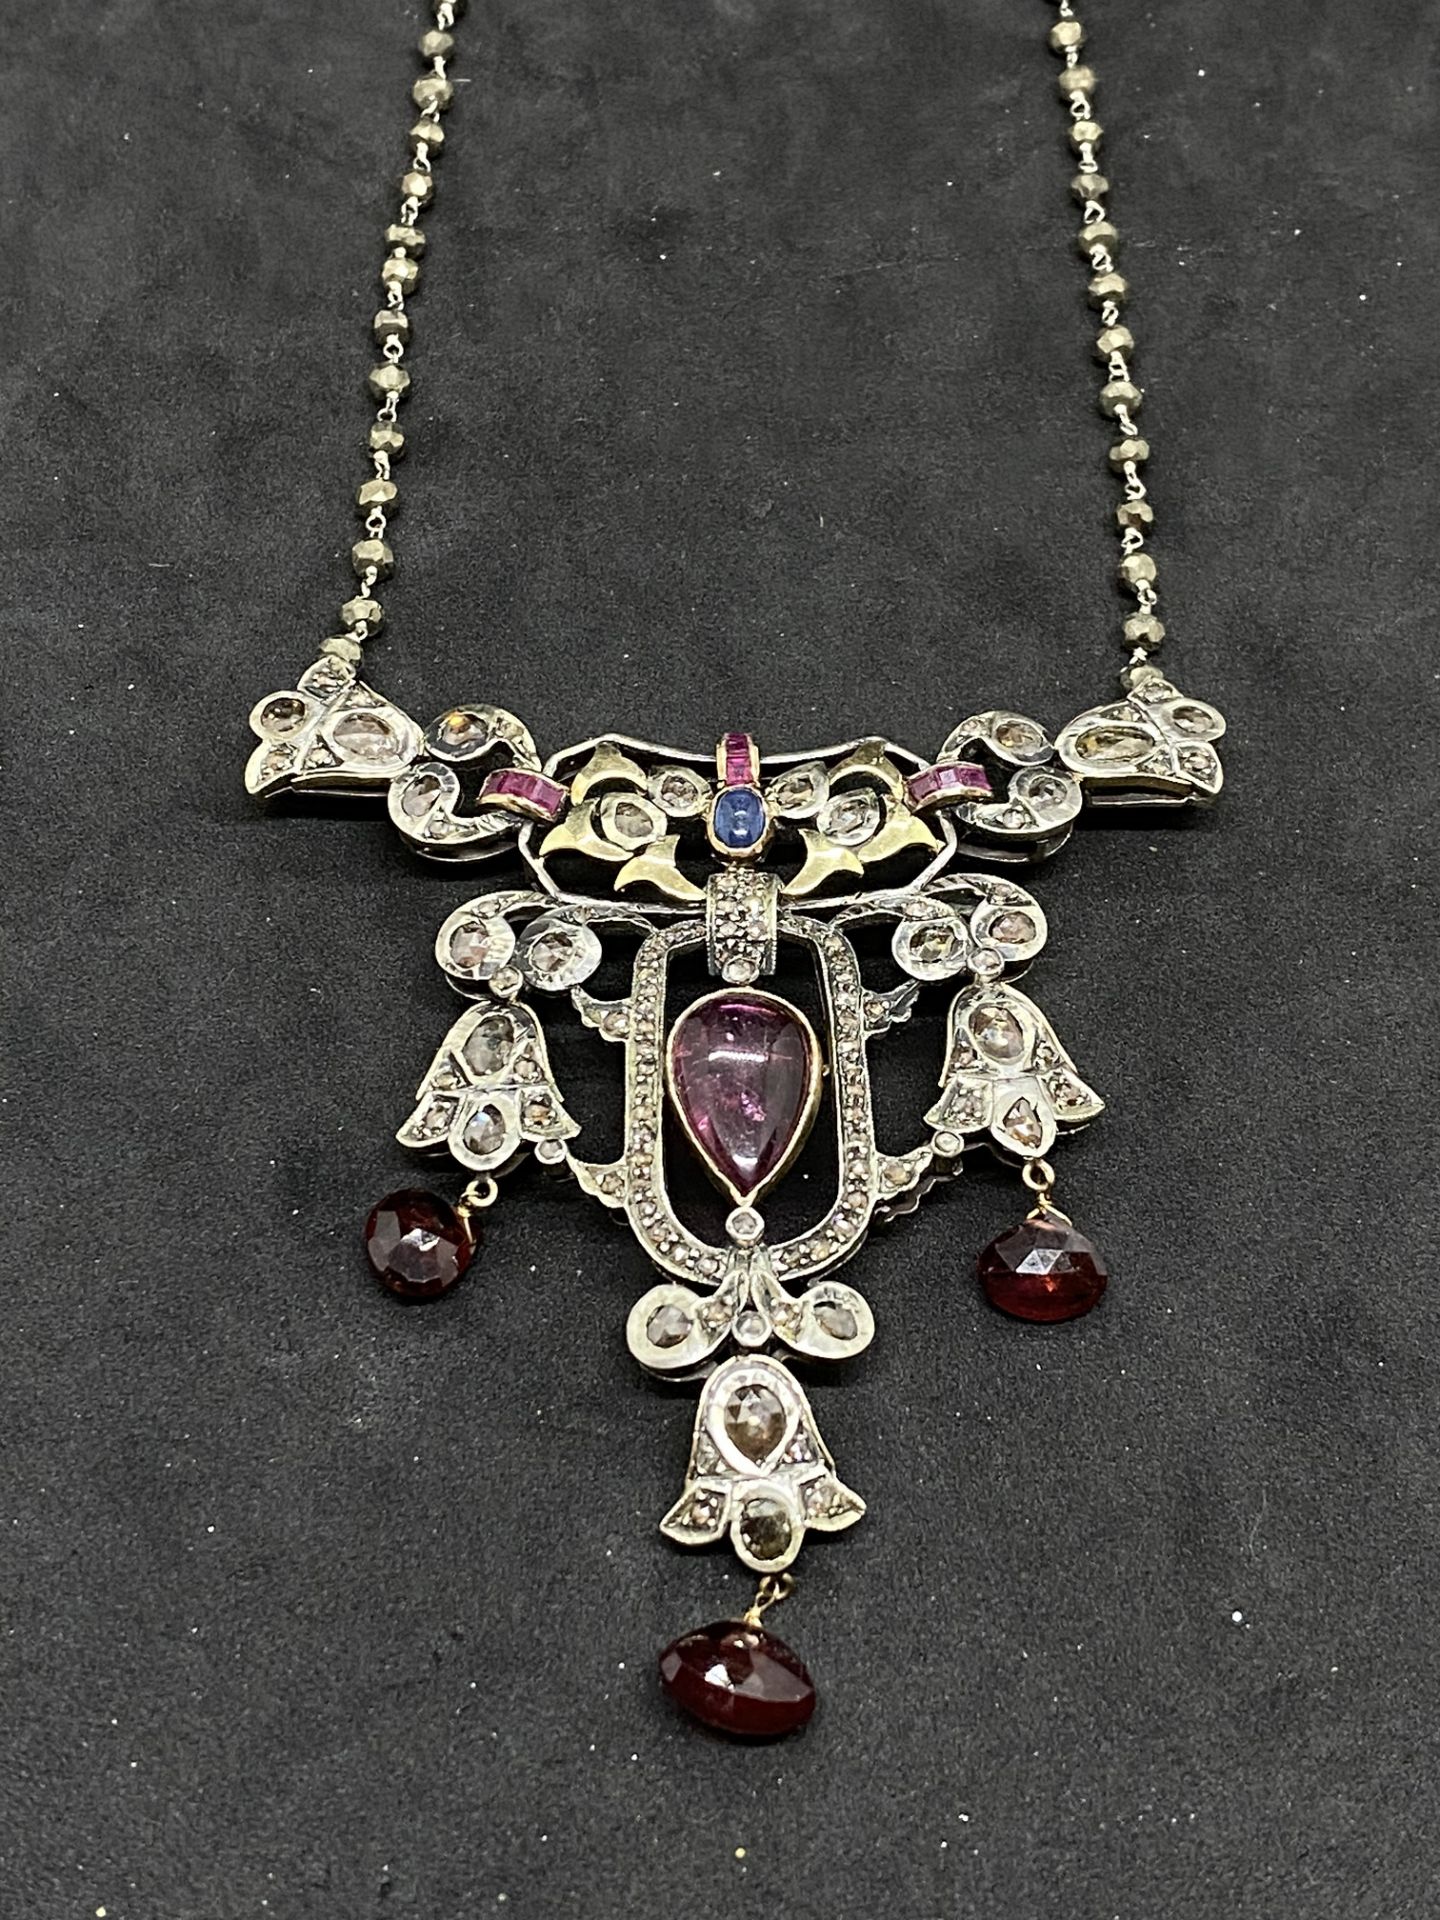 RUBY, ROSE DIAMOND, GARNET & SAPPHIRE SET NECKLACE IN YELLOW & WHITE METAL TESTED AS SILVER & GOLD - Image 12 of 12